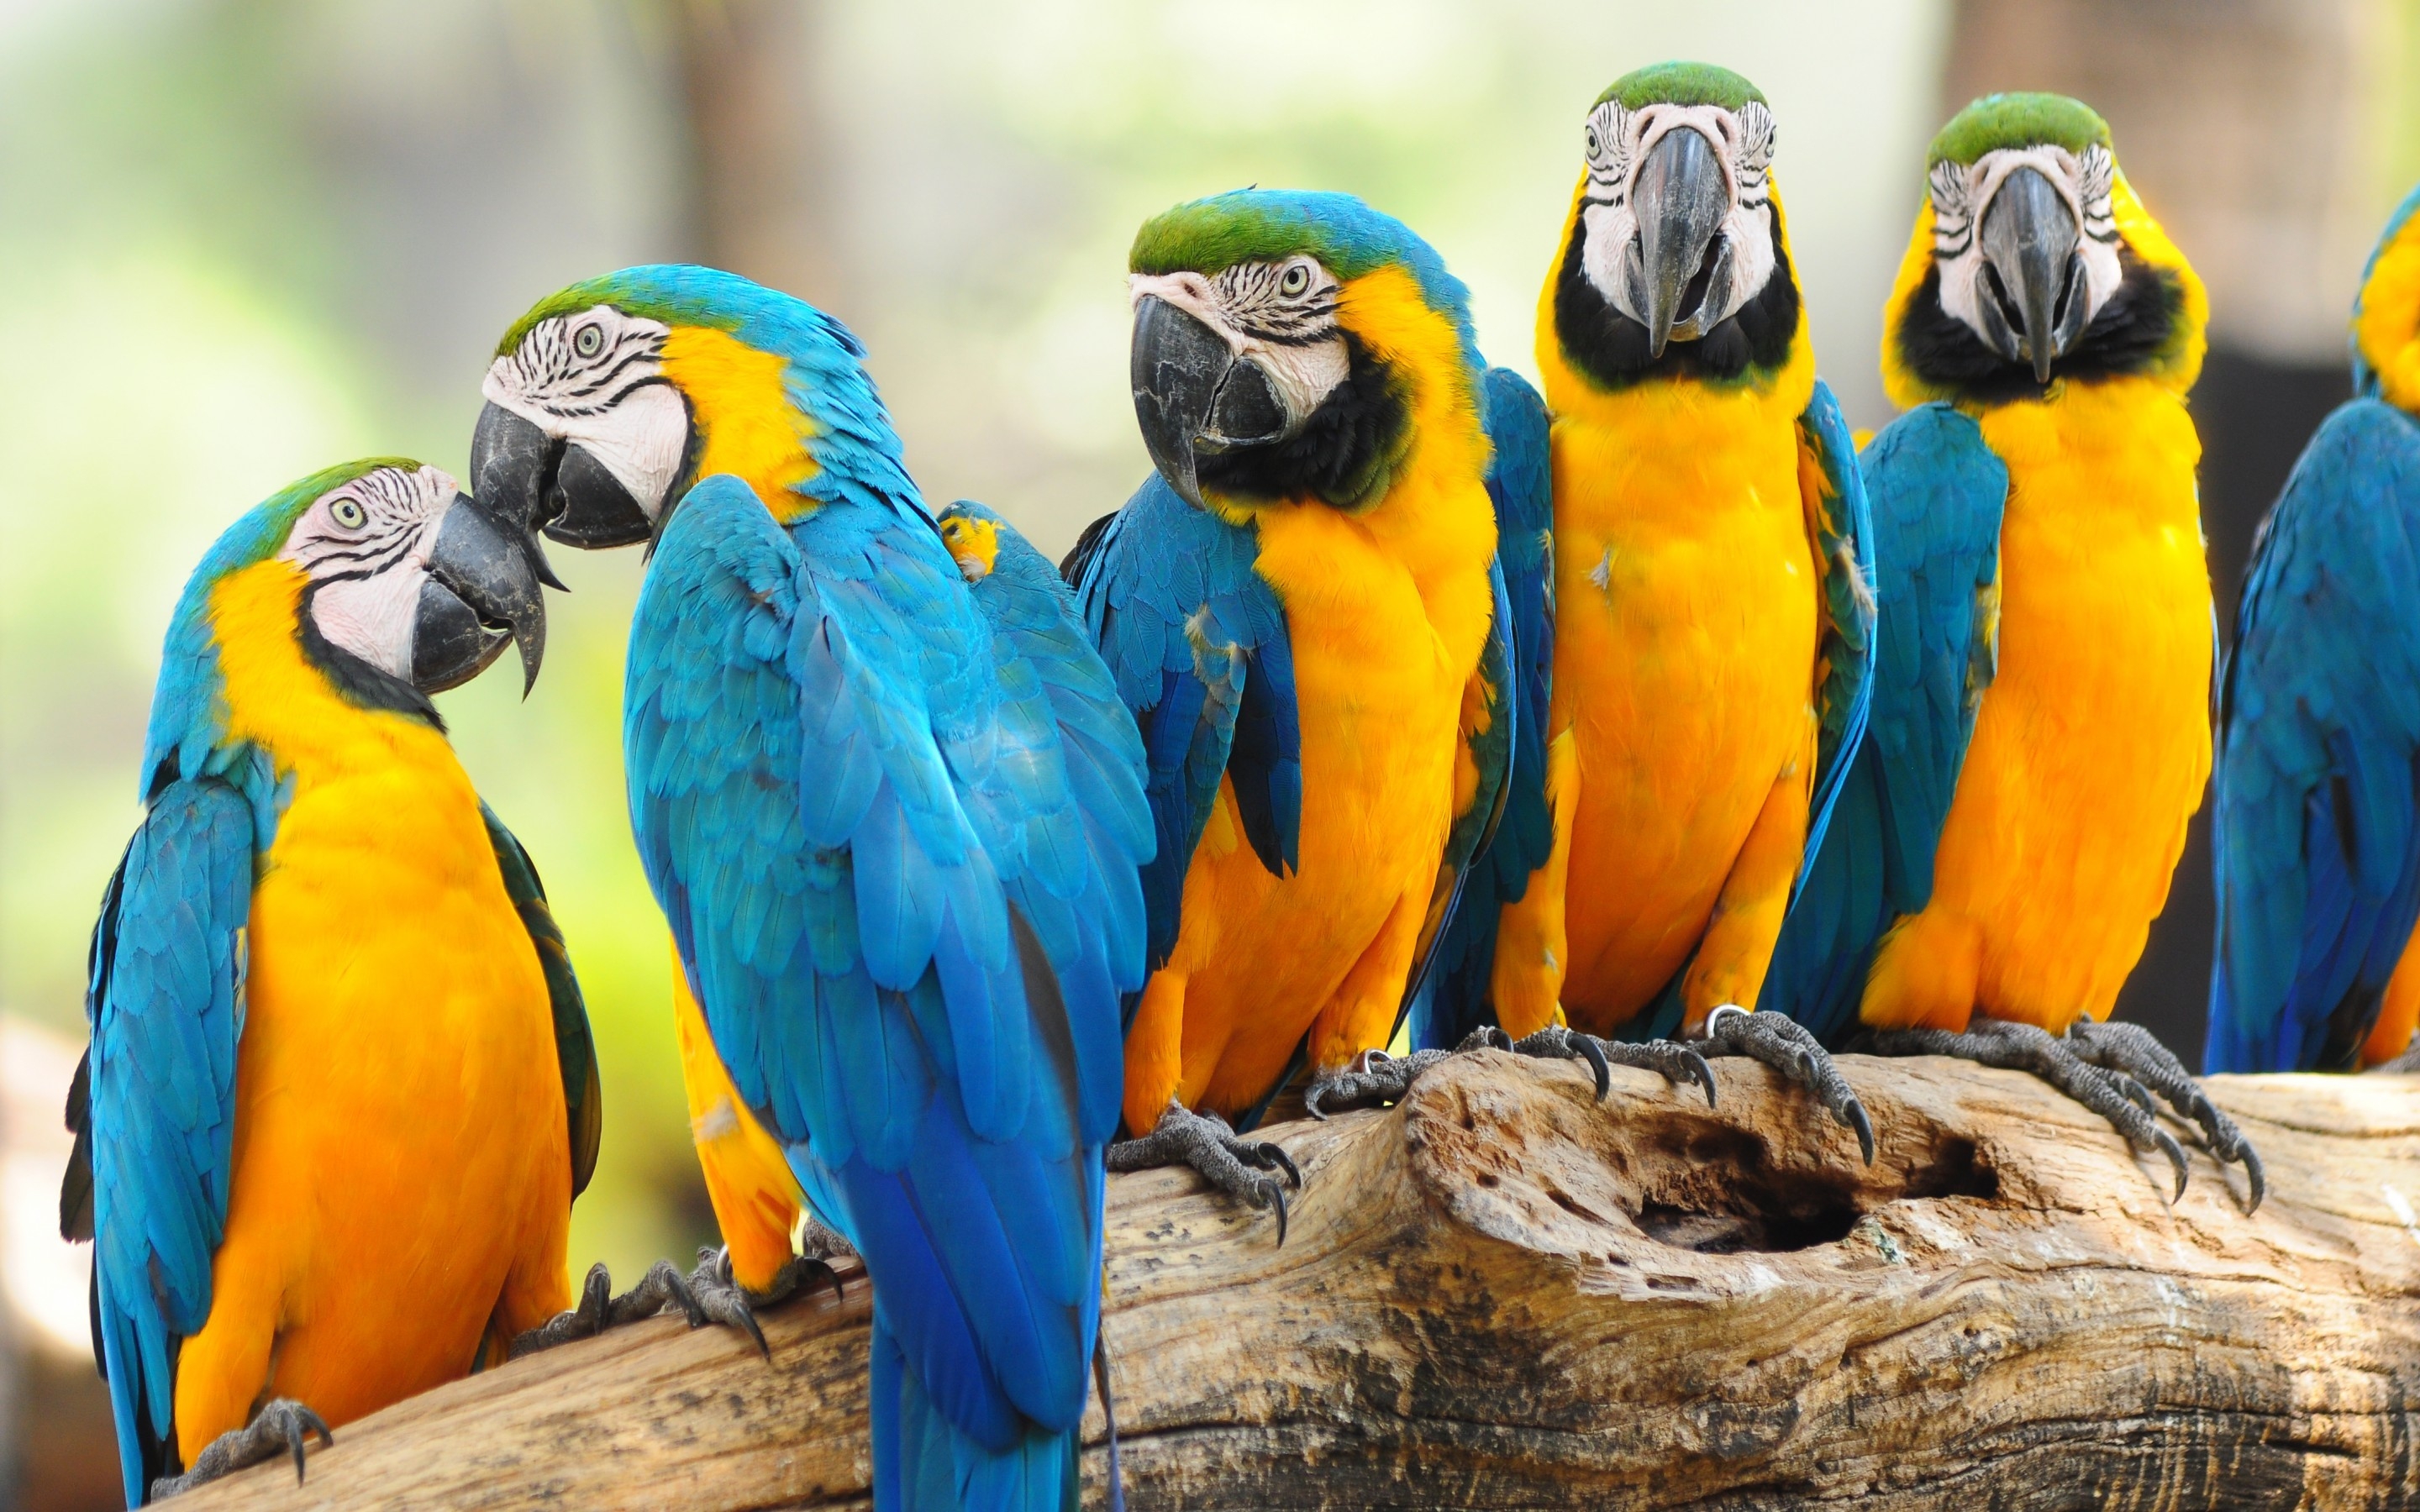 Cool Parrots for 2880 x 1800 Retina Display resolution